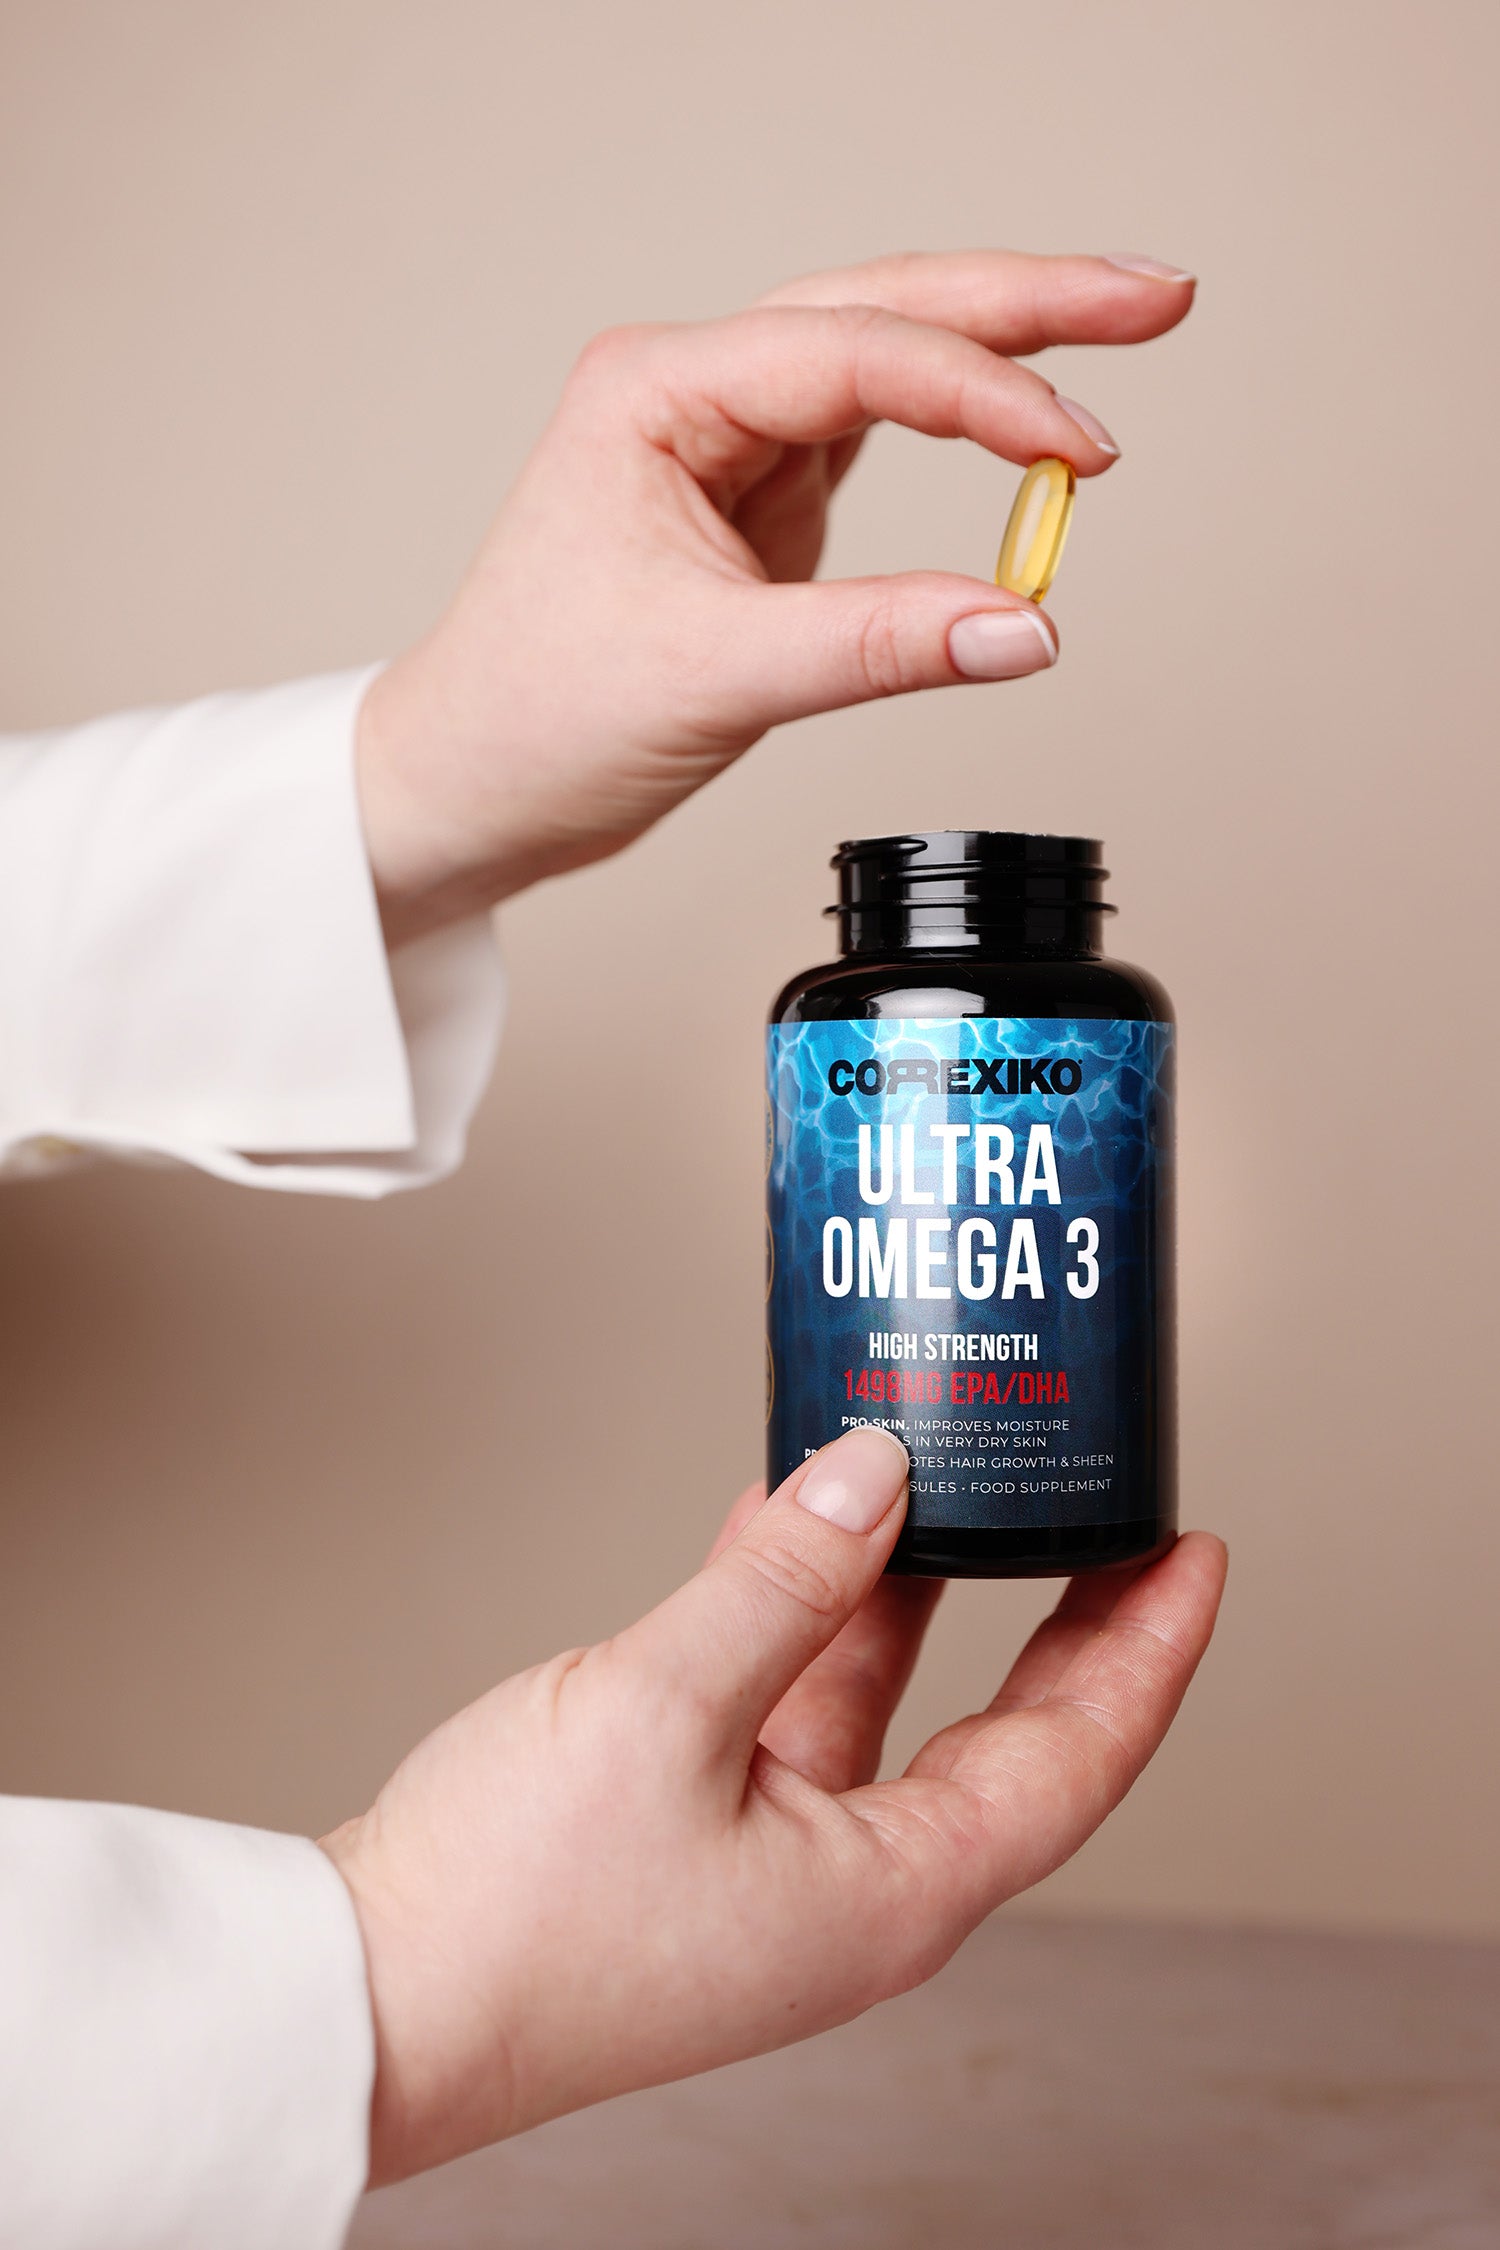 Omega 3 for Hair Growth - How Does It Help? - HK Vitals